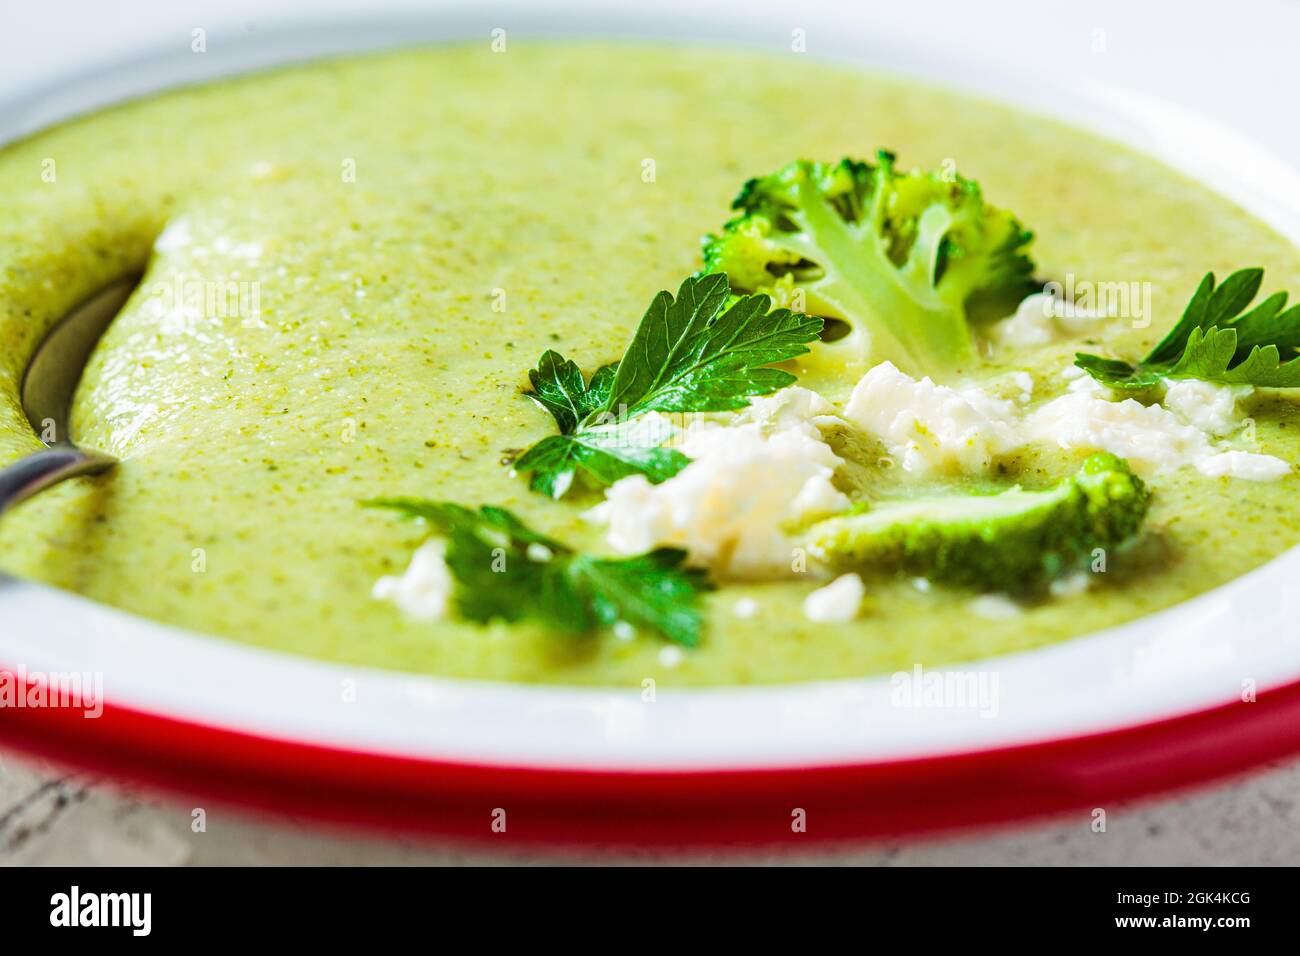 Broccoli soup puree with feta cheese in white plate, close-up. Cooking healthy food concept. Stock Photo